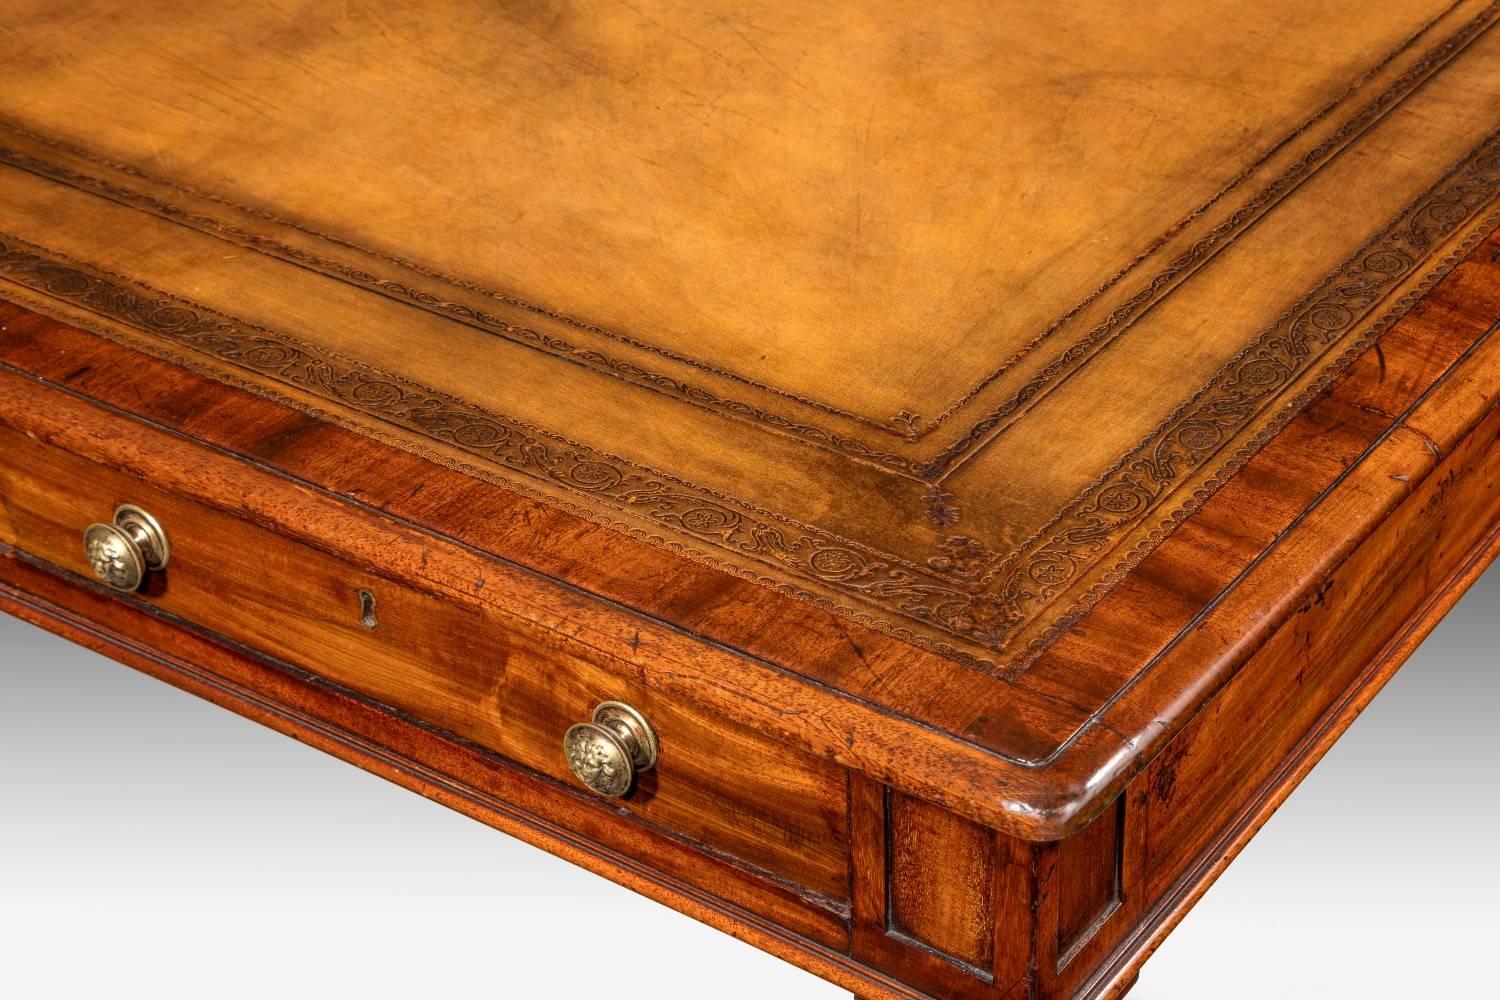 English Regency Period Writing Table Attributed to Gillow